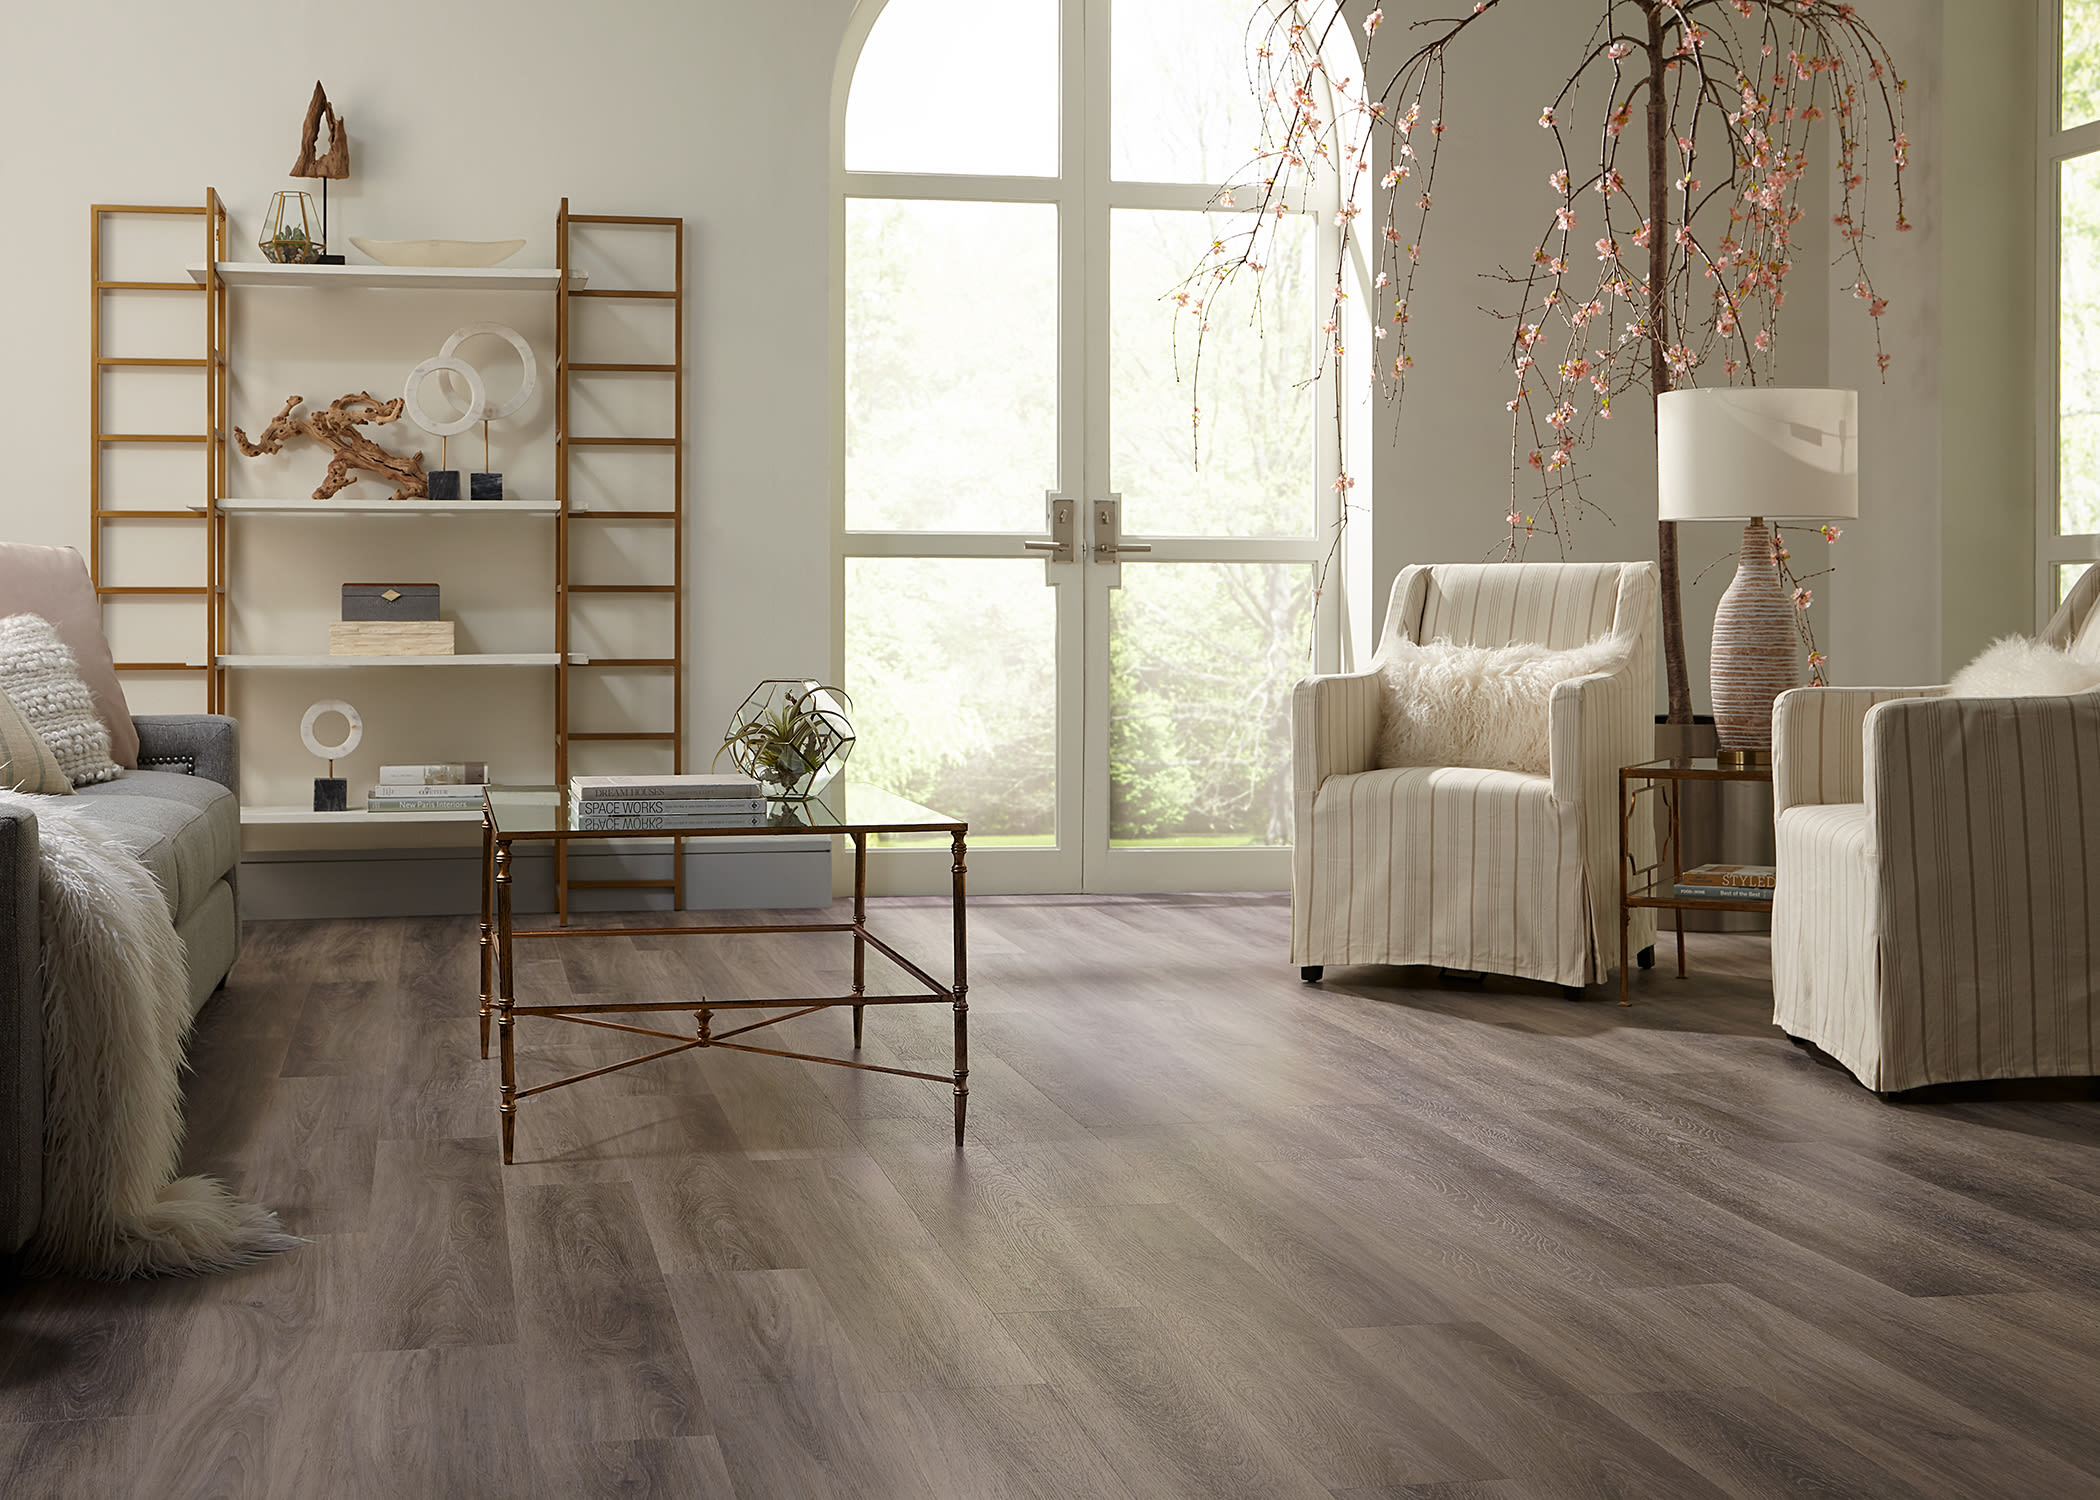 large room with wooden accents, blossoming tree feature, and rigid vinyl plank flooring